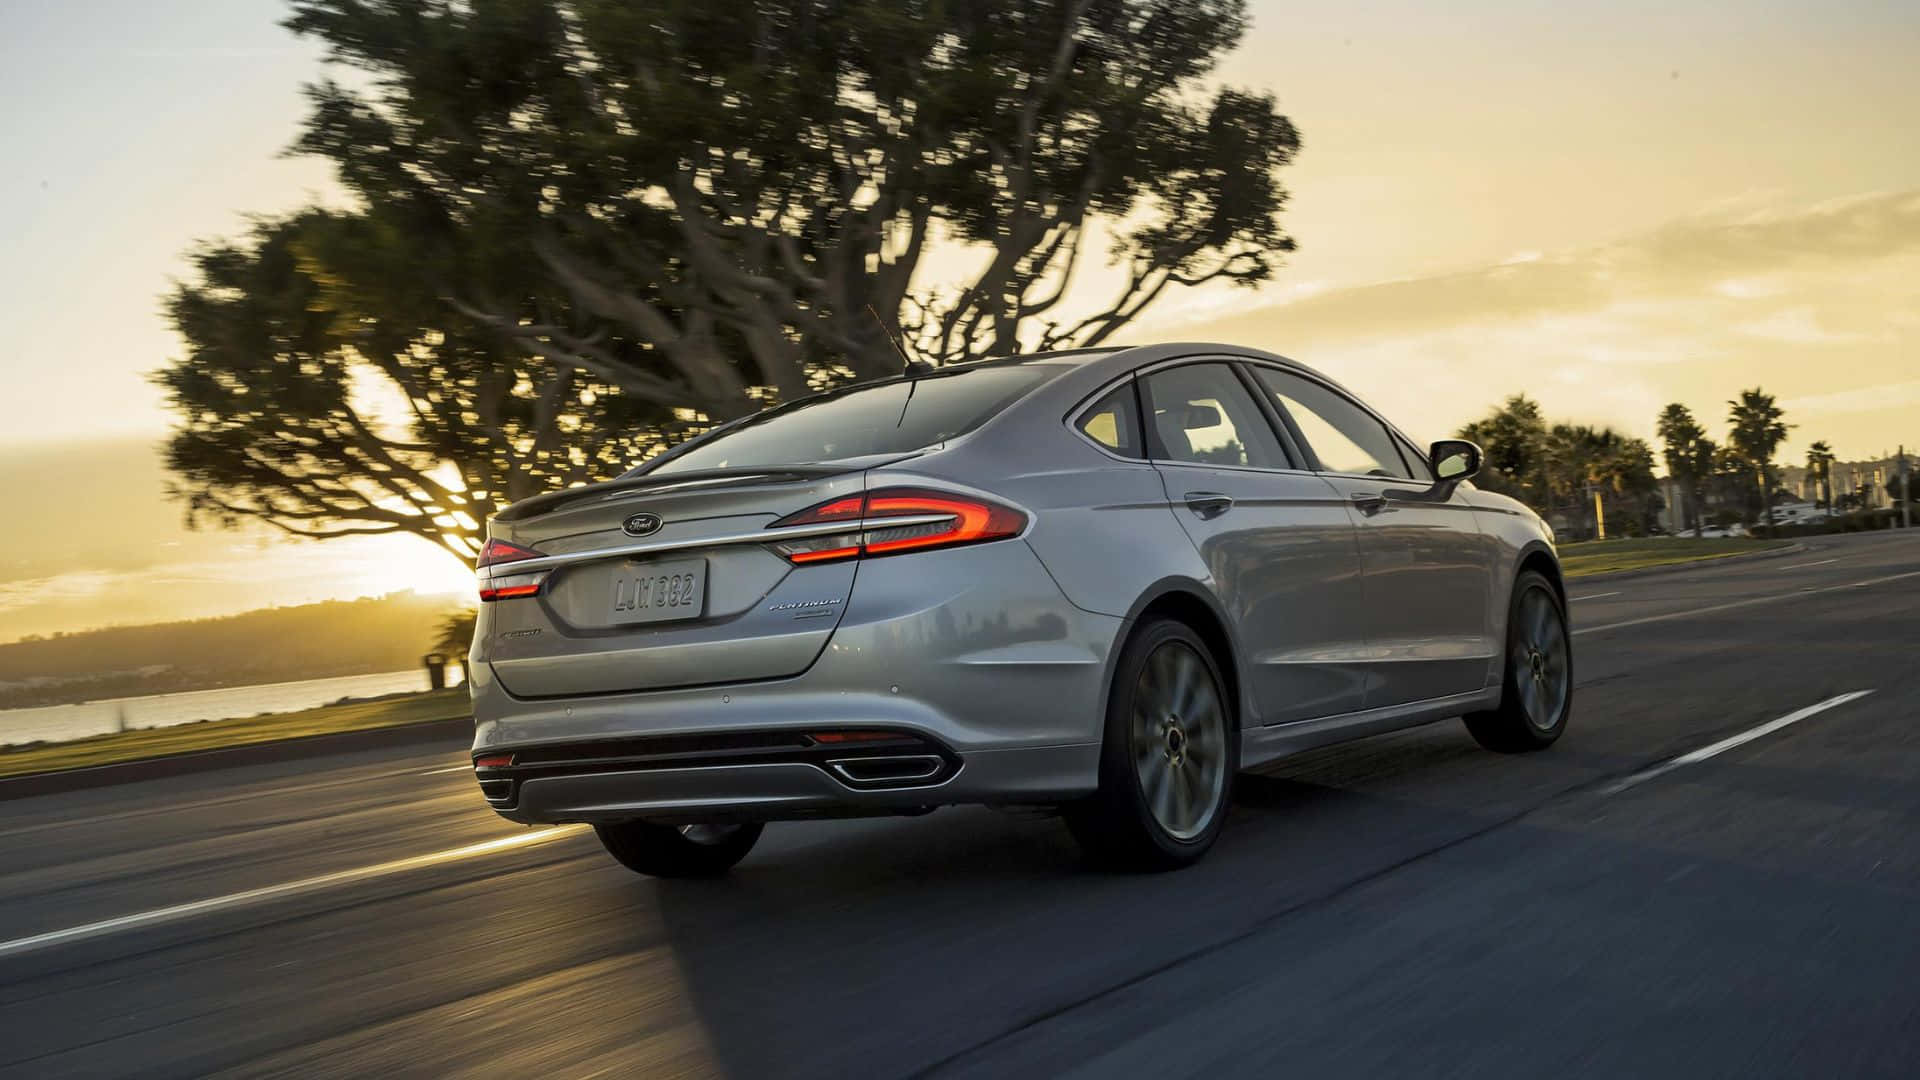 Stunning Ford Fusion in Motion Wallpaper